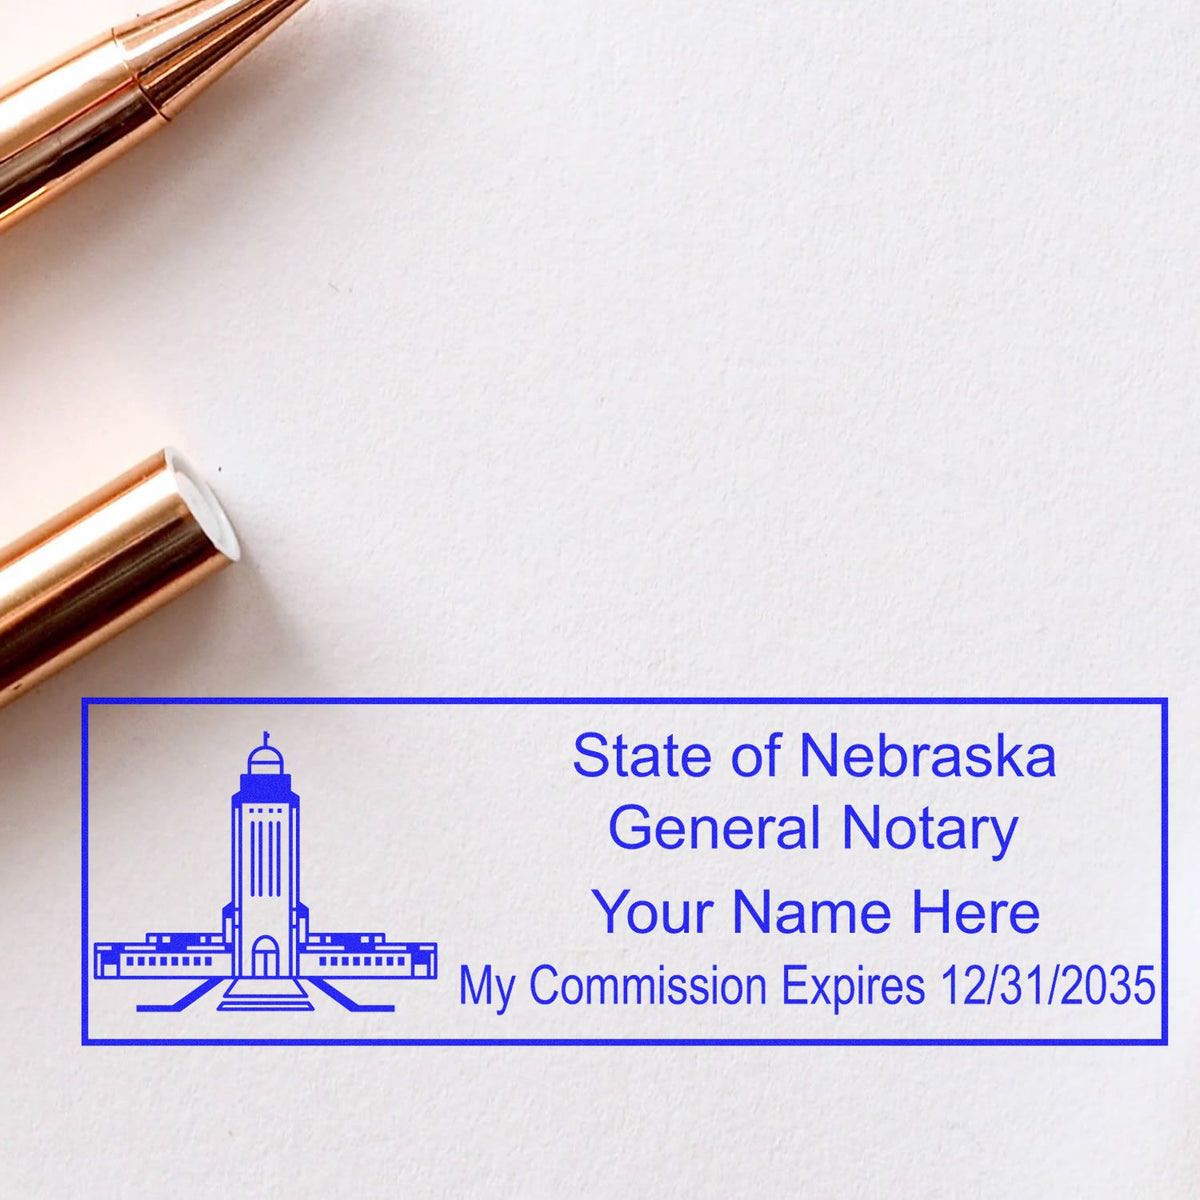 The PSI Nebraska Notary Stamp stamp impression comes to life with a crisp, detailed photo on paper - showcasing true professional quality.